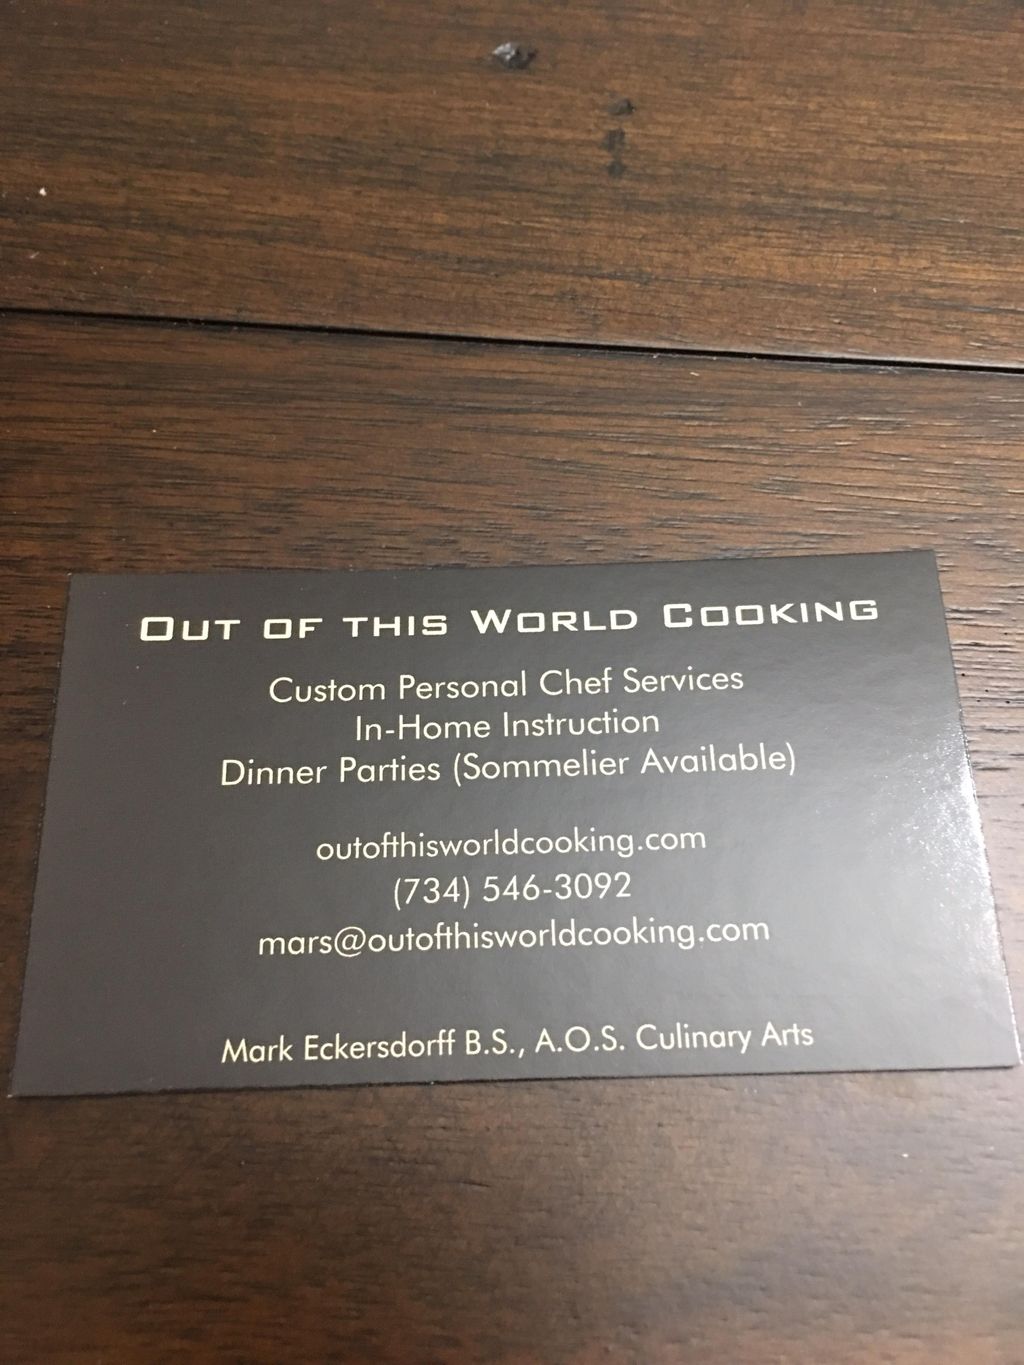 Out of this World Cooking